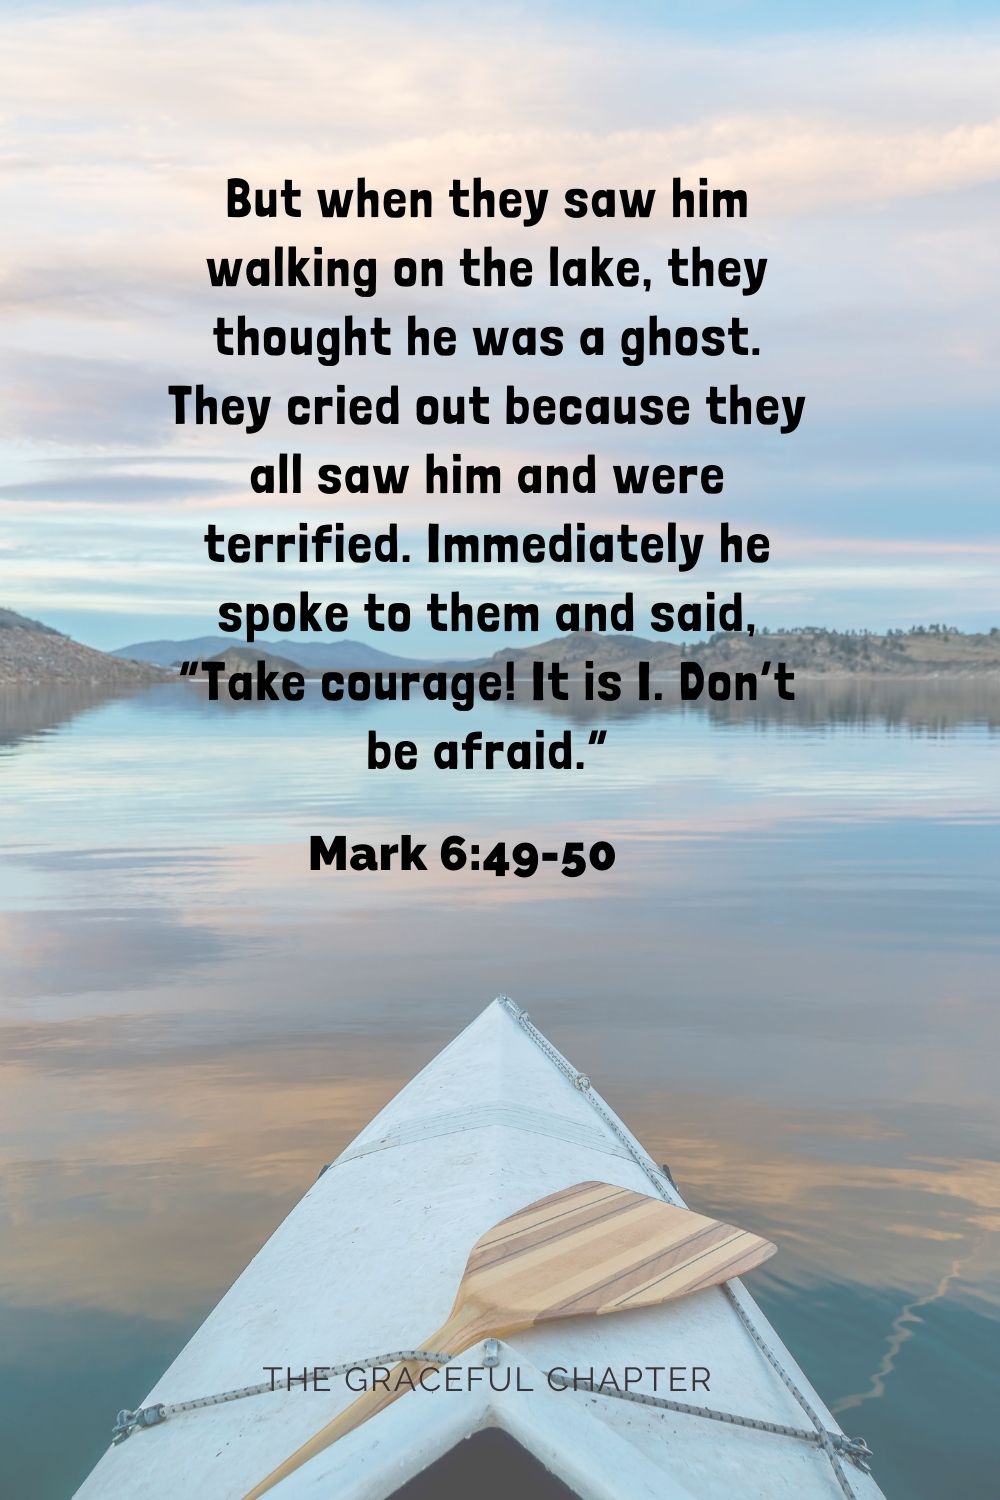 But when they saw him walking on the lake, they thought he was a ghost. They cried out, because they all saw him and were terrified. Immediately he spoke to them and said, “Take courage! It is I. Don’t be afraid.” Mark 6:49-50